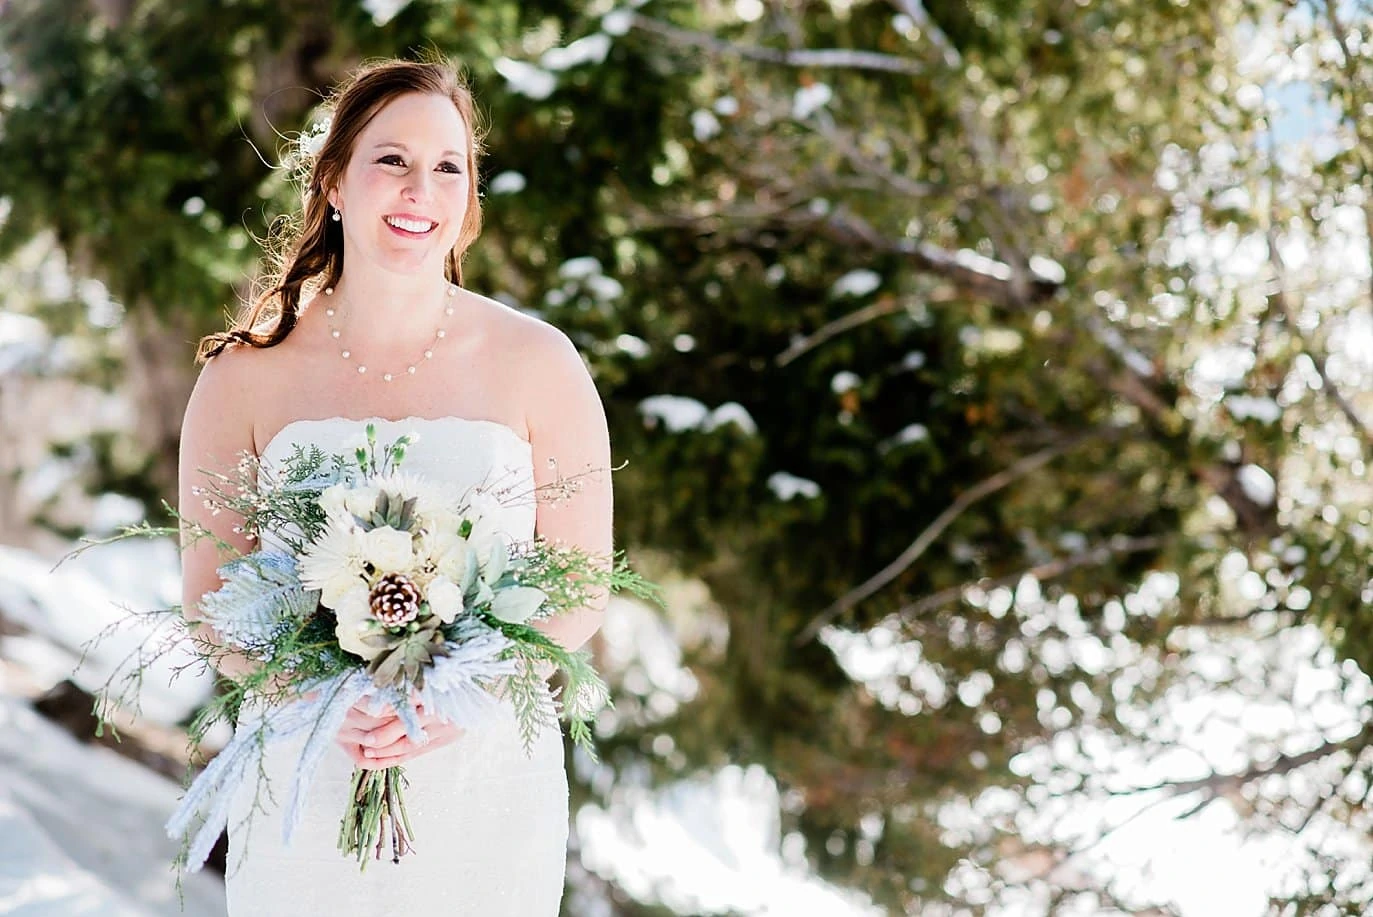 bride in strapless dress with neutral winter flowers at Sapphire Point Elopement by Dillon wedding photographer Jennie Crate Photographer